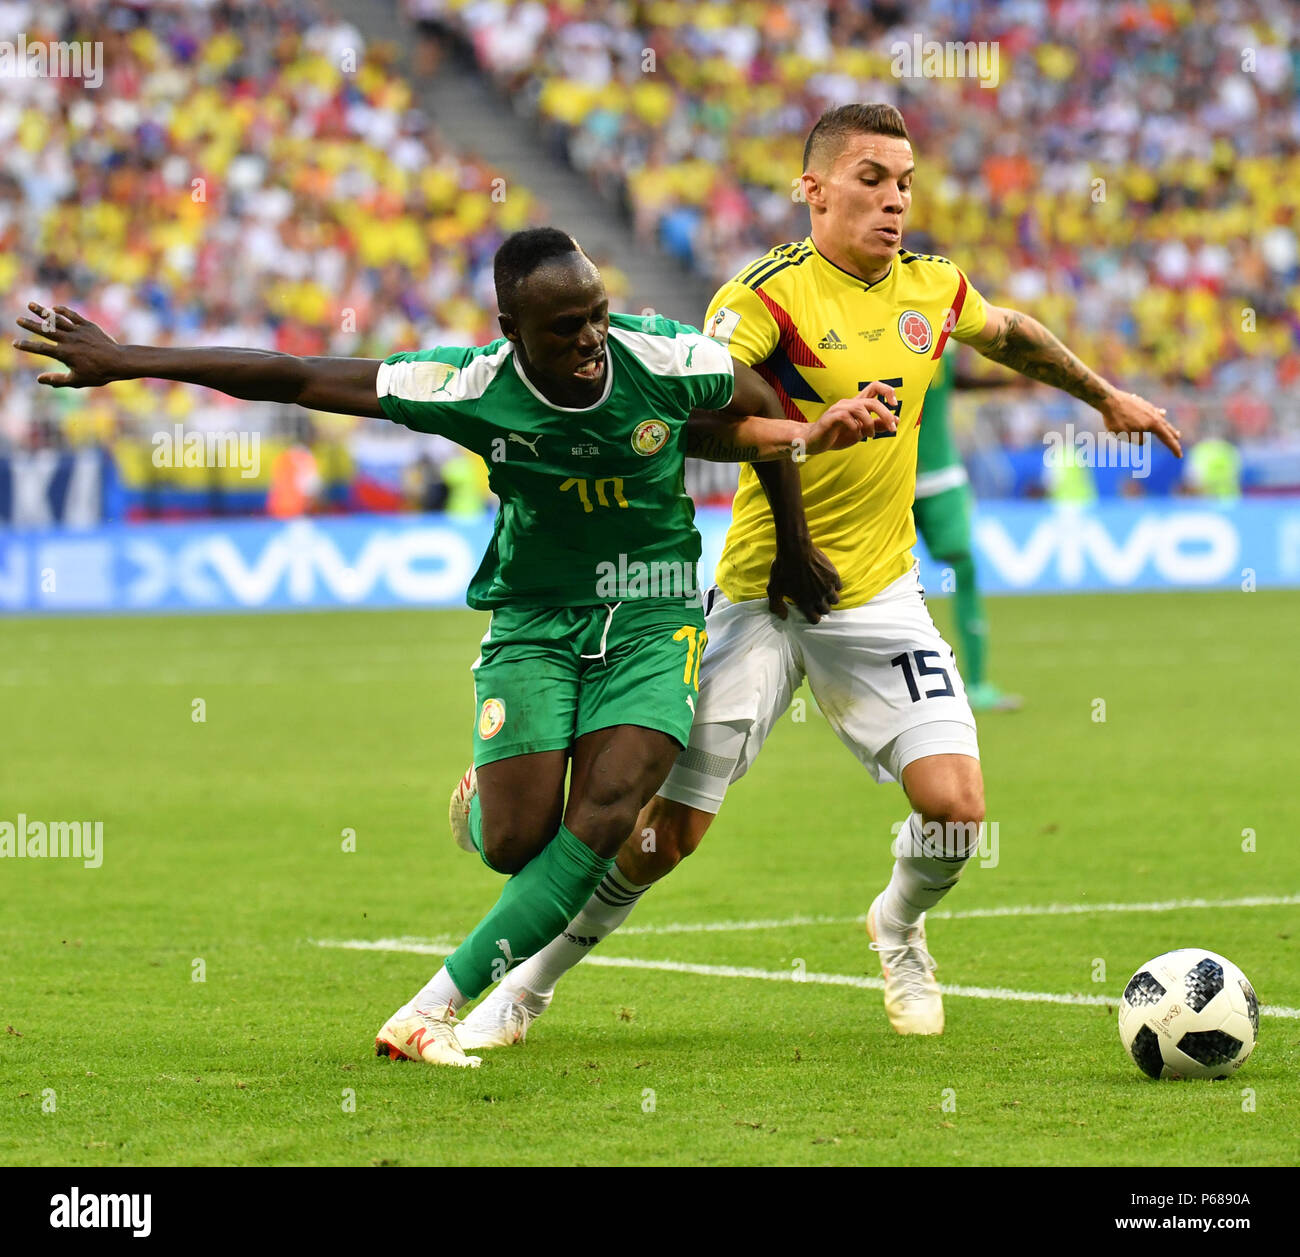 Samara, Russia. 28th June, 2018. Mateus Uribe (R) of Colombia vies with Sadio Mane of Senegal during the 2018 FIFA World Cup Group H match between Colombia and Senegal in Samara, Russia, June 28, 2018. Credit: Liu Dawei/Xinhua/Alamy Live News Stock Photo